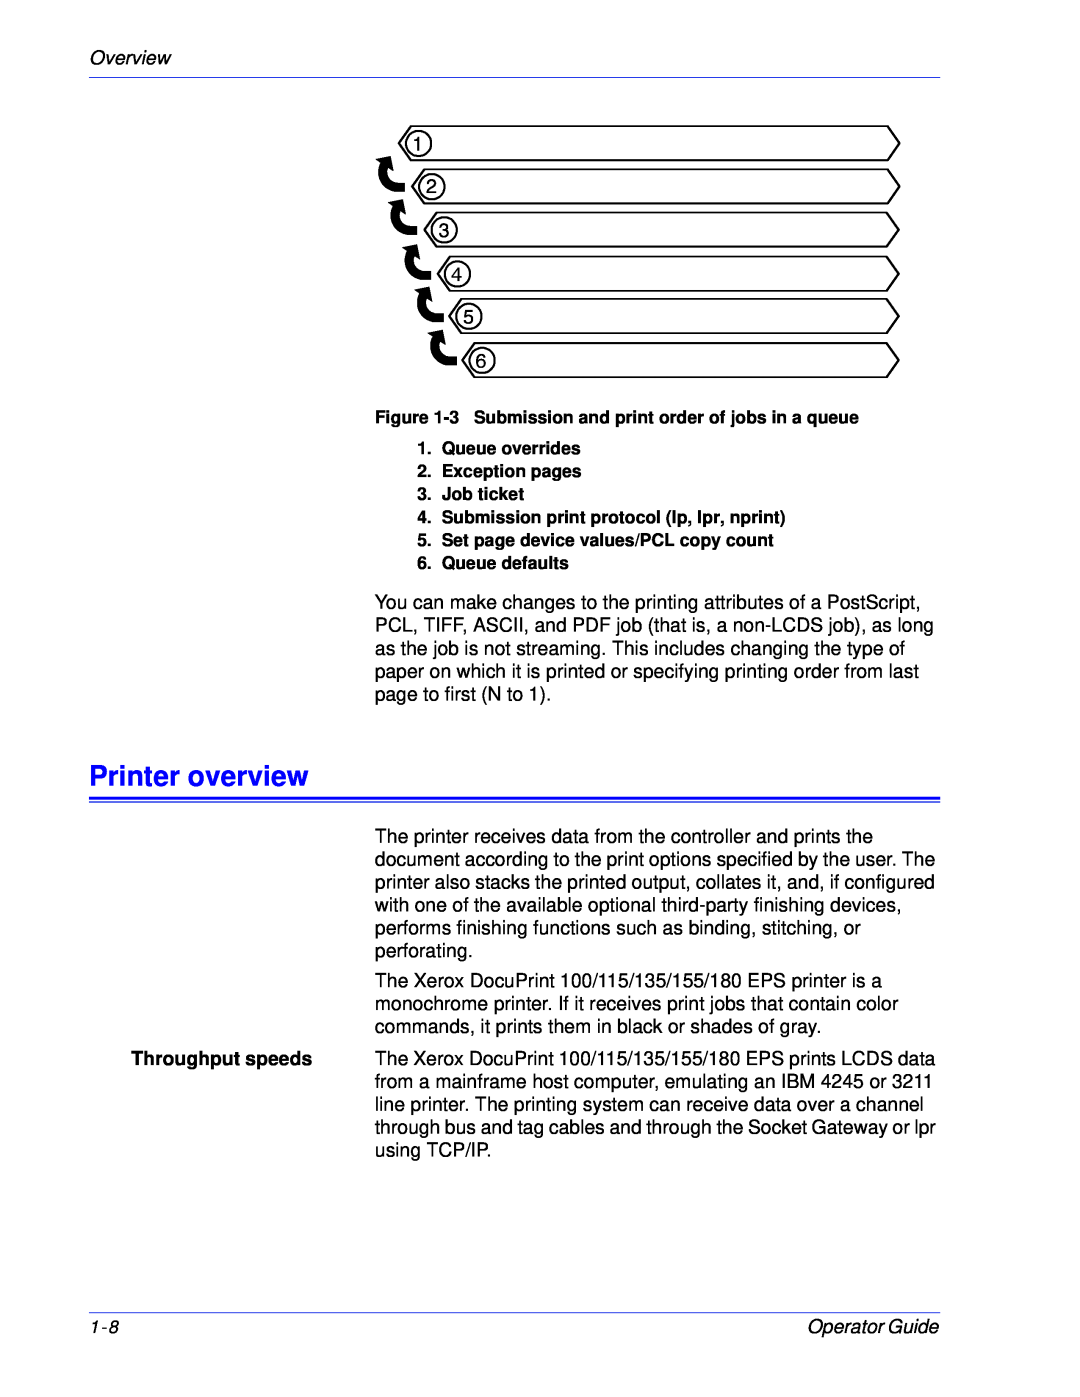 Xerox 100, 180 EPS manual Printer overview, Overview, Queue overrides 2.Exception pages 3.Job ticket, Queue defaults 